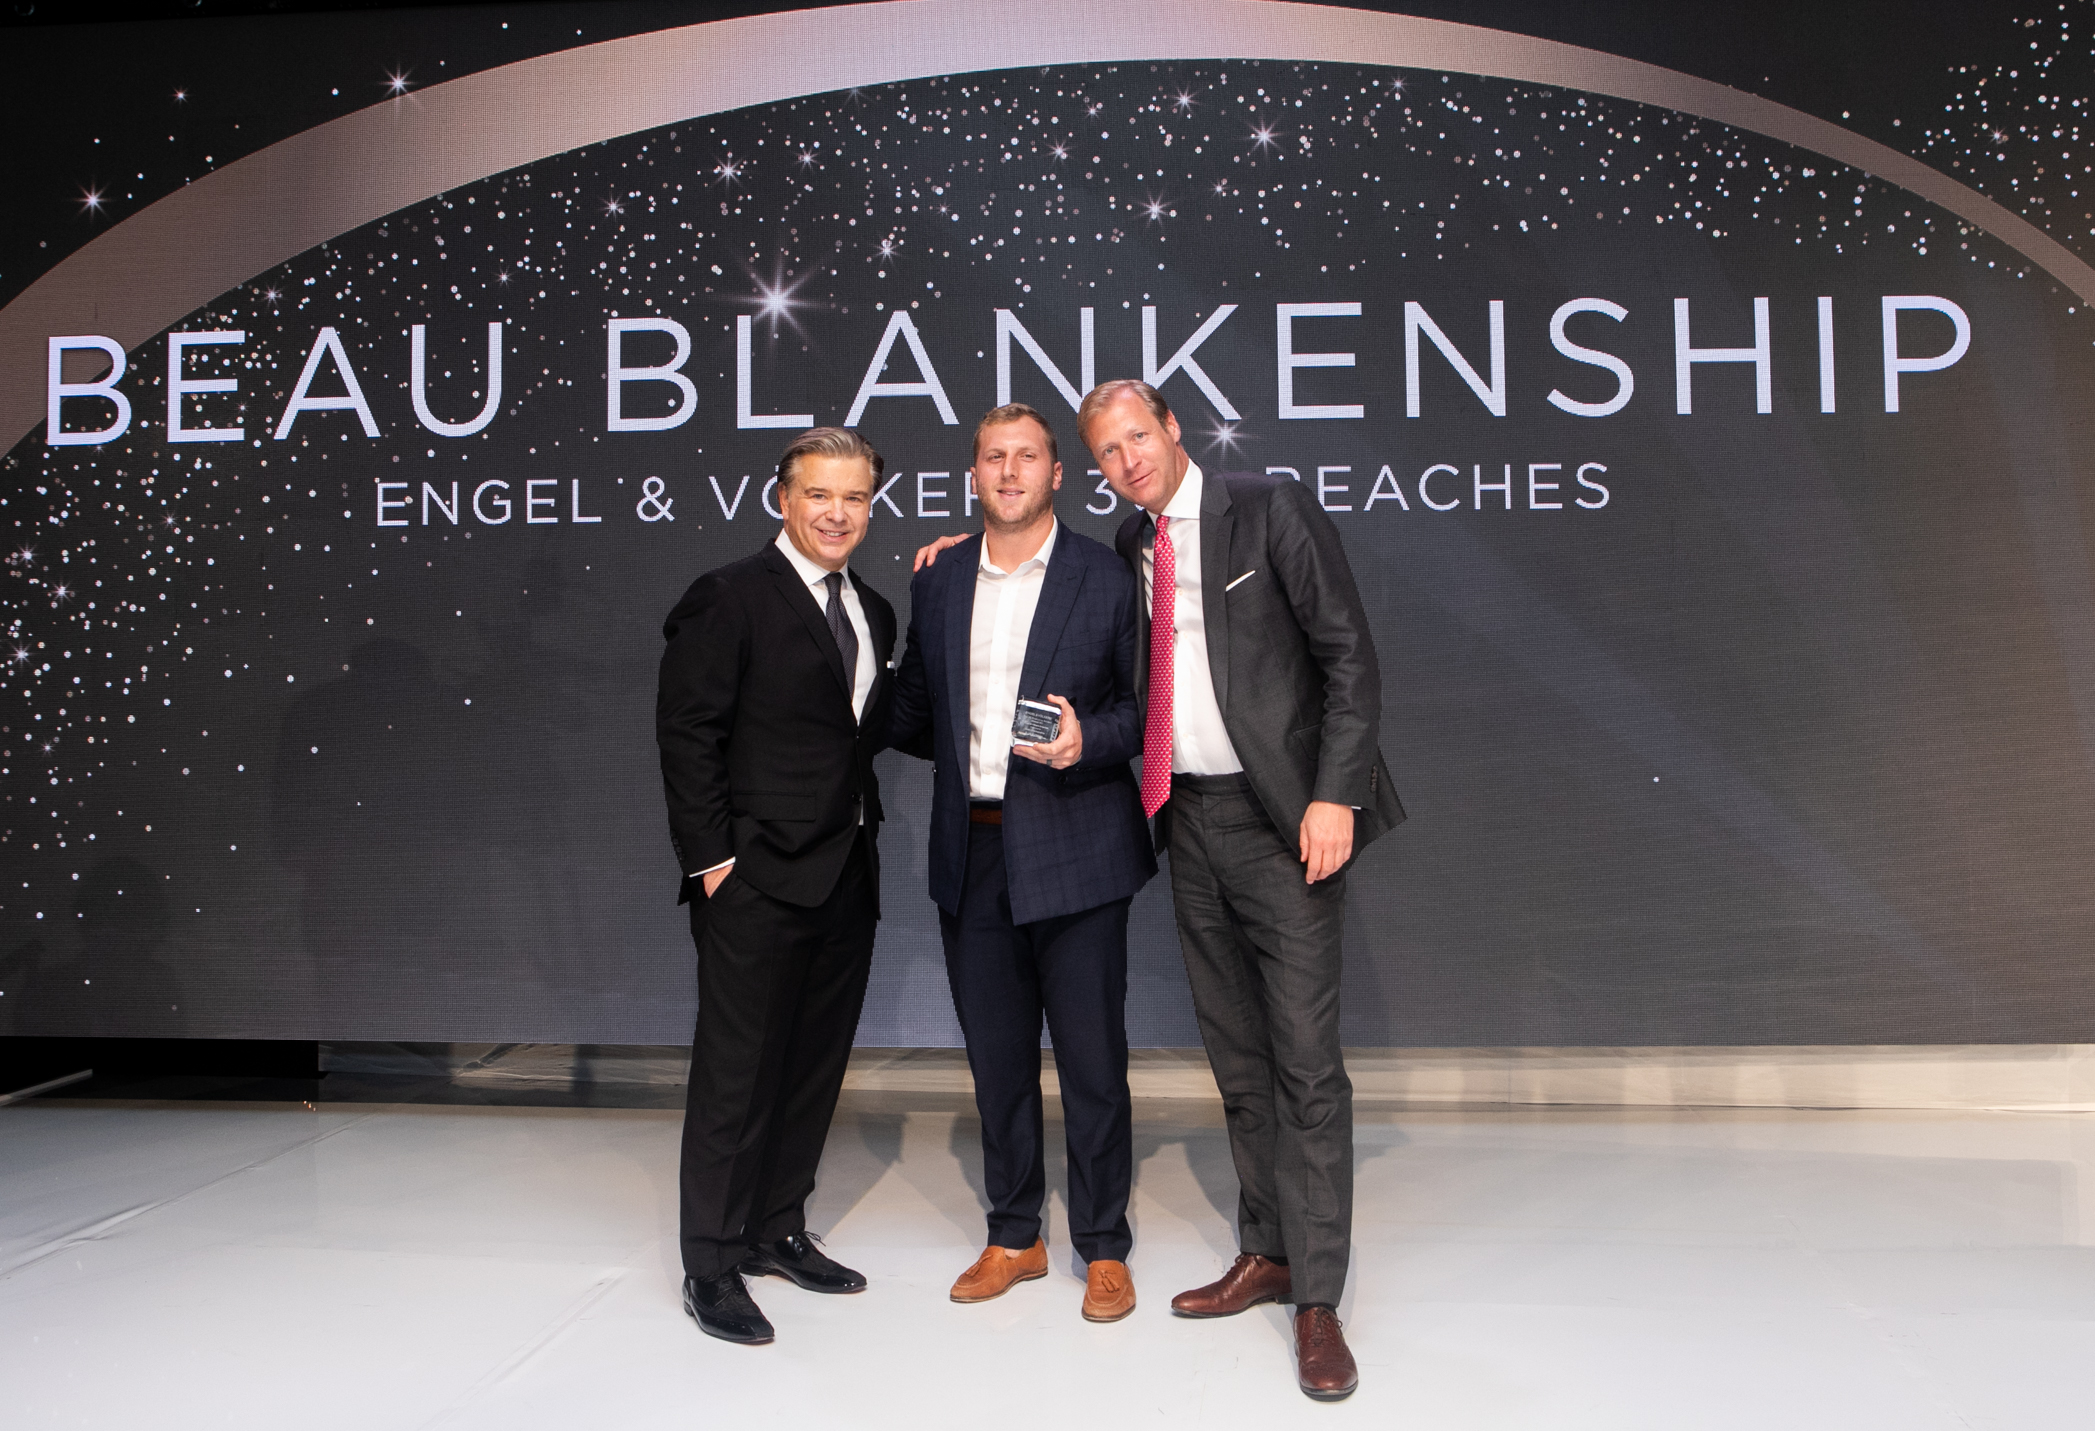 Beau Blankenship of Engel & Völkers 30A Beaches was awarded as one of the Top 25 Advisors in GCI